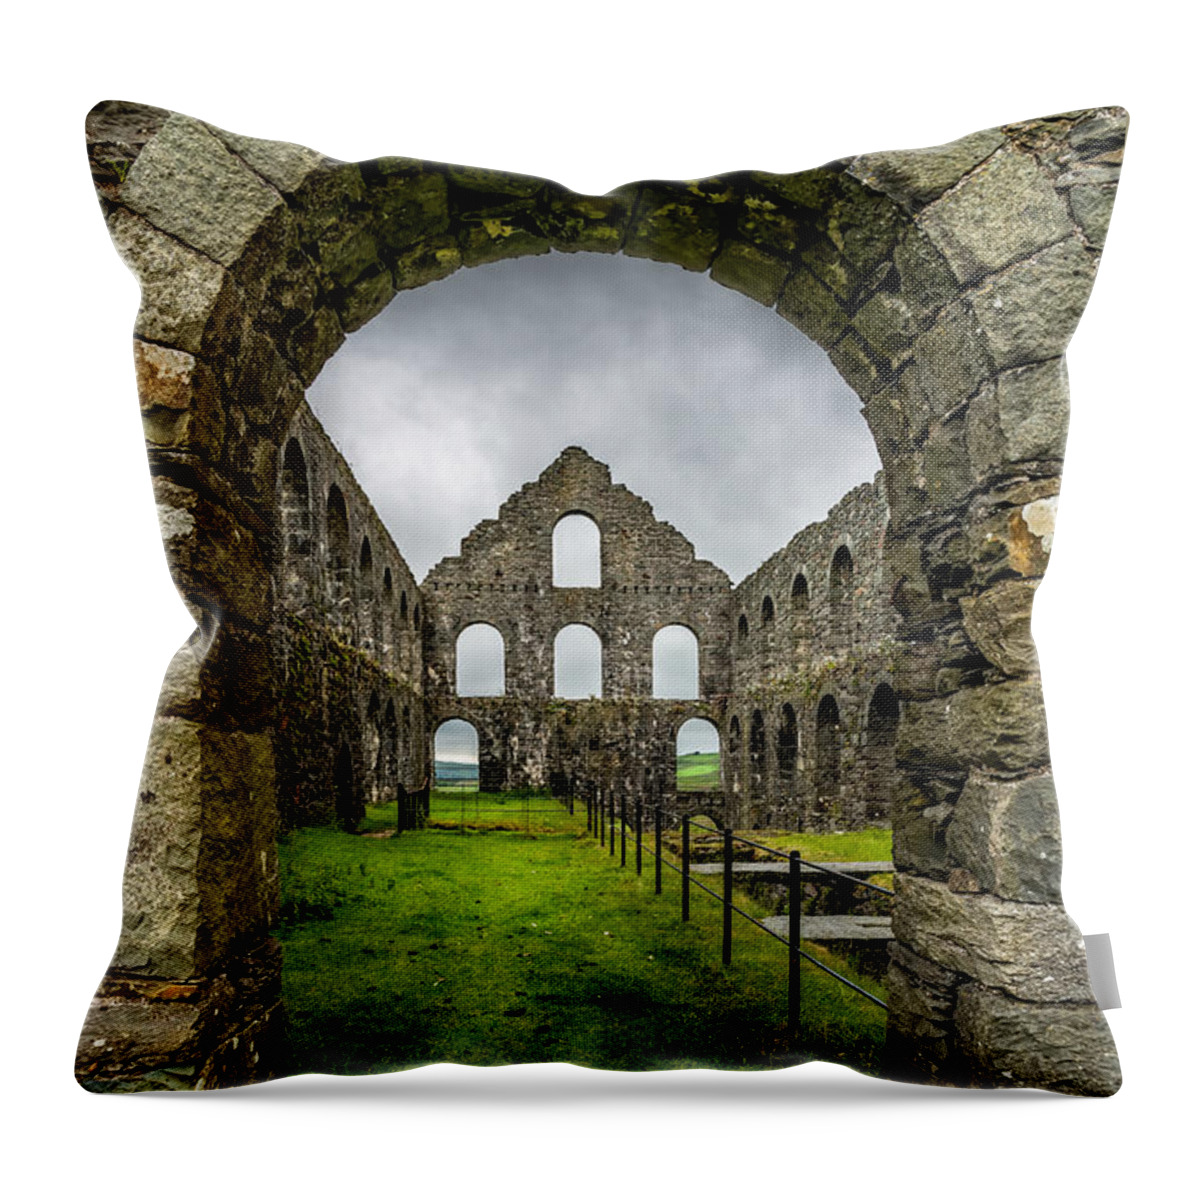 Pont Y Pandy Mill Throw Pillow featuring the photograph Ynysypandy Slate Mill by Adrian Evans